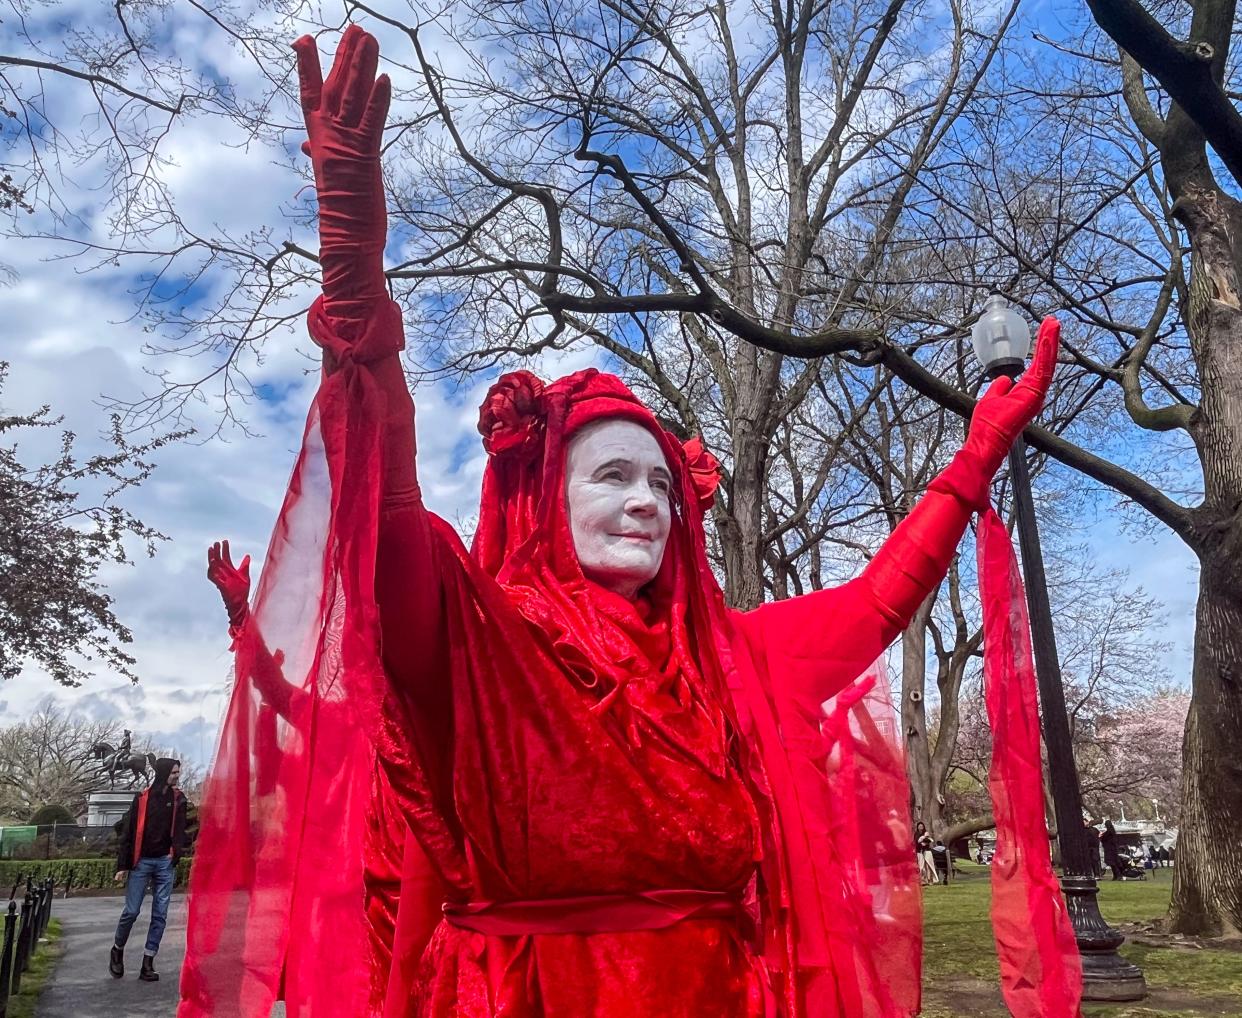 Jenny Allen, 76, of Framingham, joined the "red rebel" protest, which took place on April 21, starting at the Boston Common.